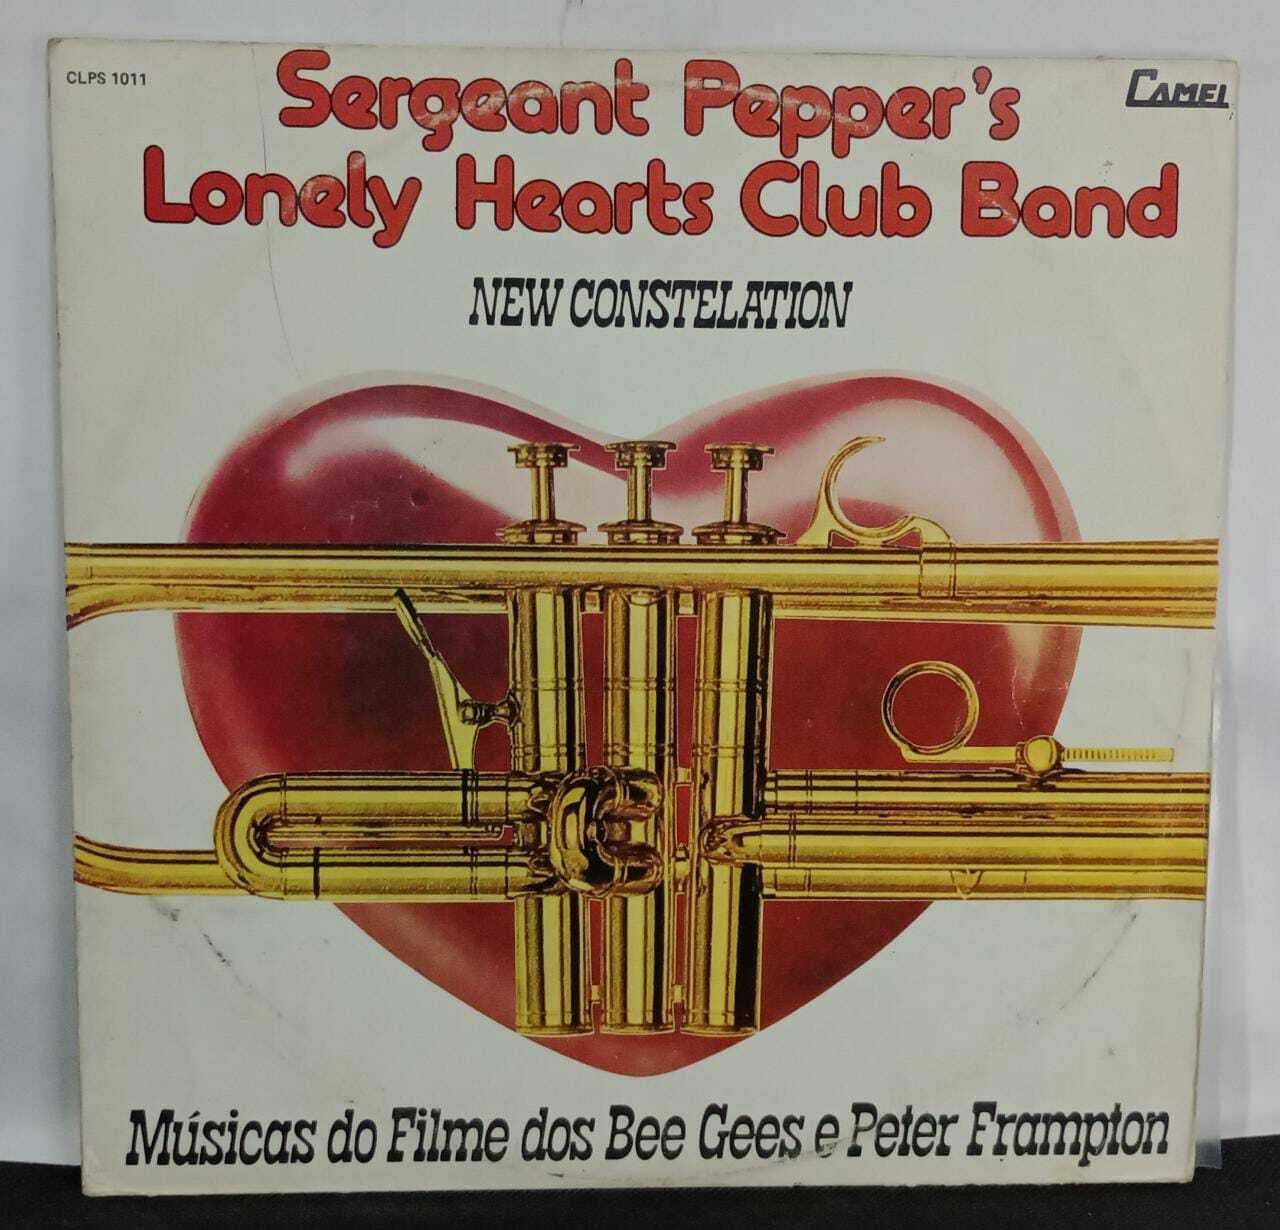 Vinil - New Constelation - Sergeant Peppers Lonely Hearts Club Band